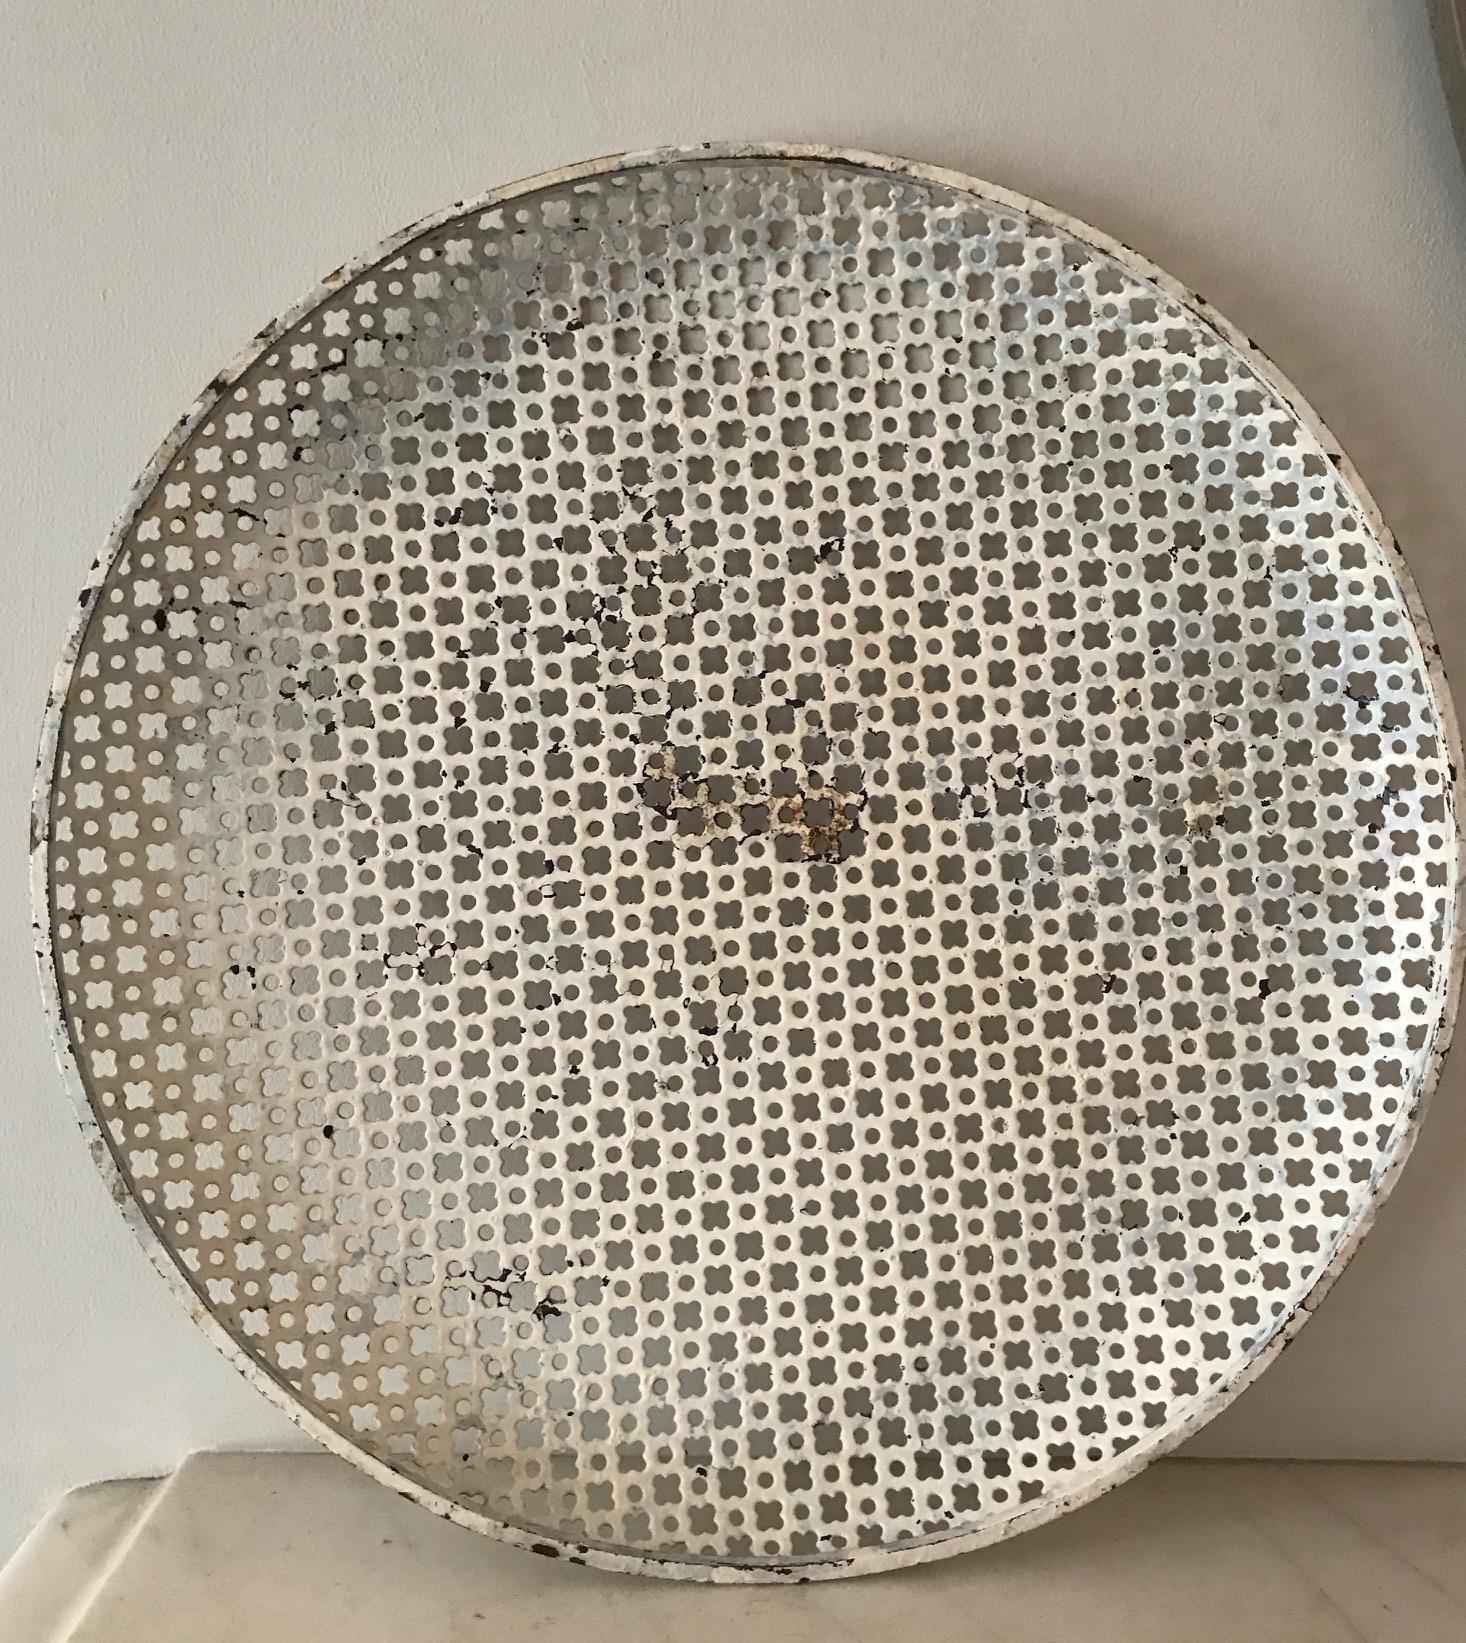 A large circular perforated metal tray by the French designer Mathieu Mategot. The tray has visible paint loss and possibly some overpainting and there is a slight twist to the rim. It is an original piece by the French designer known for his use of